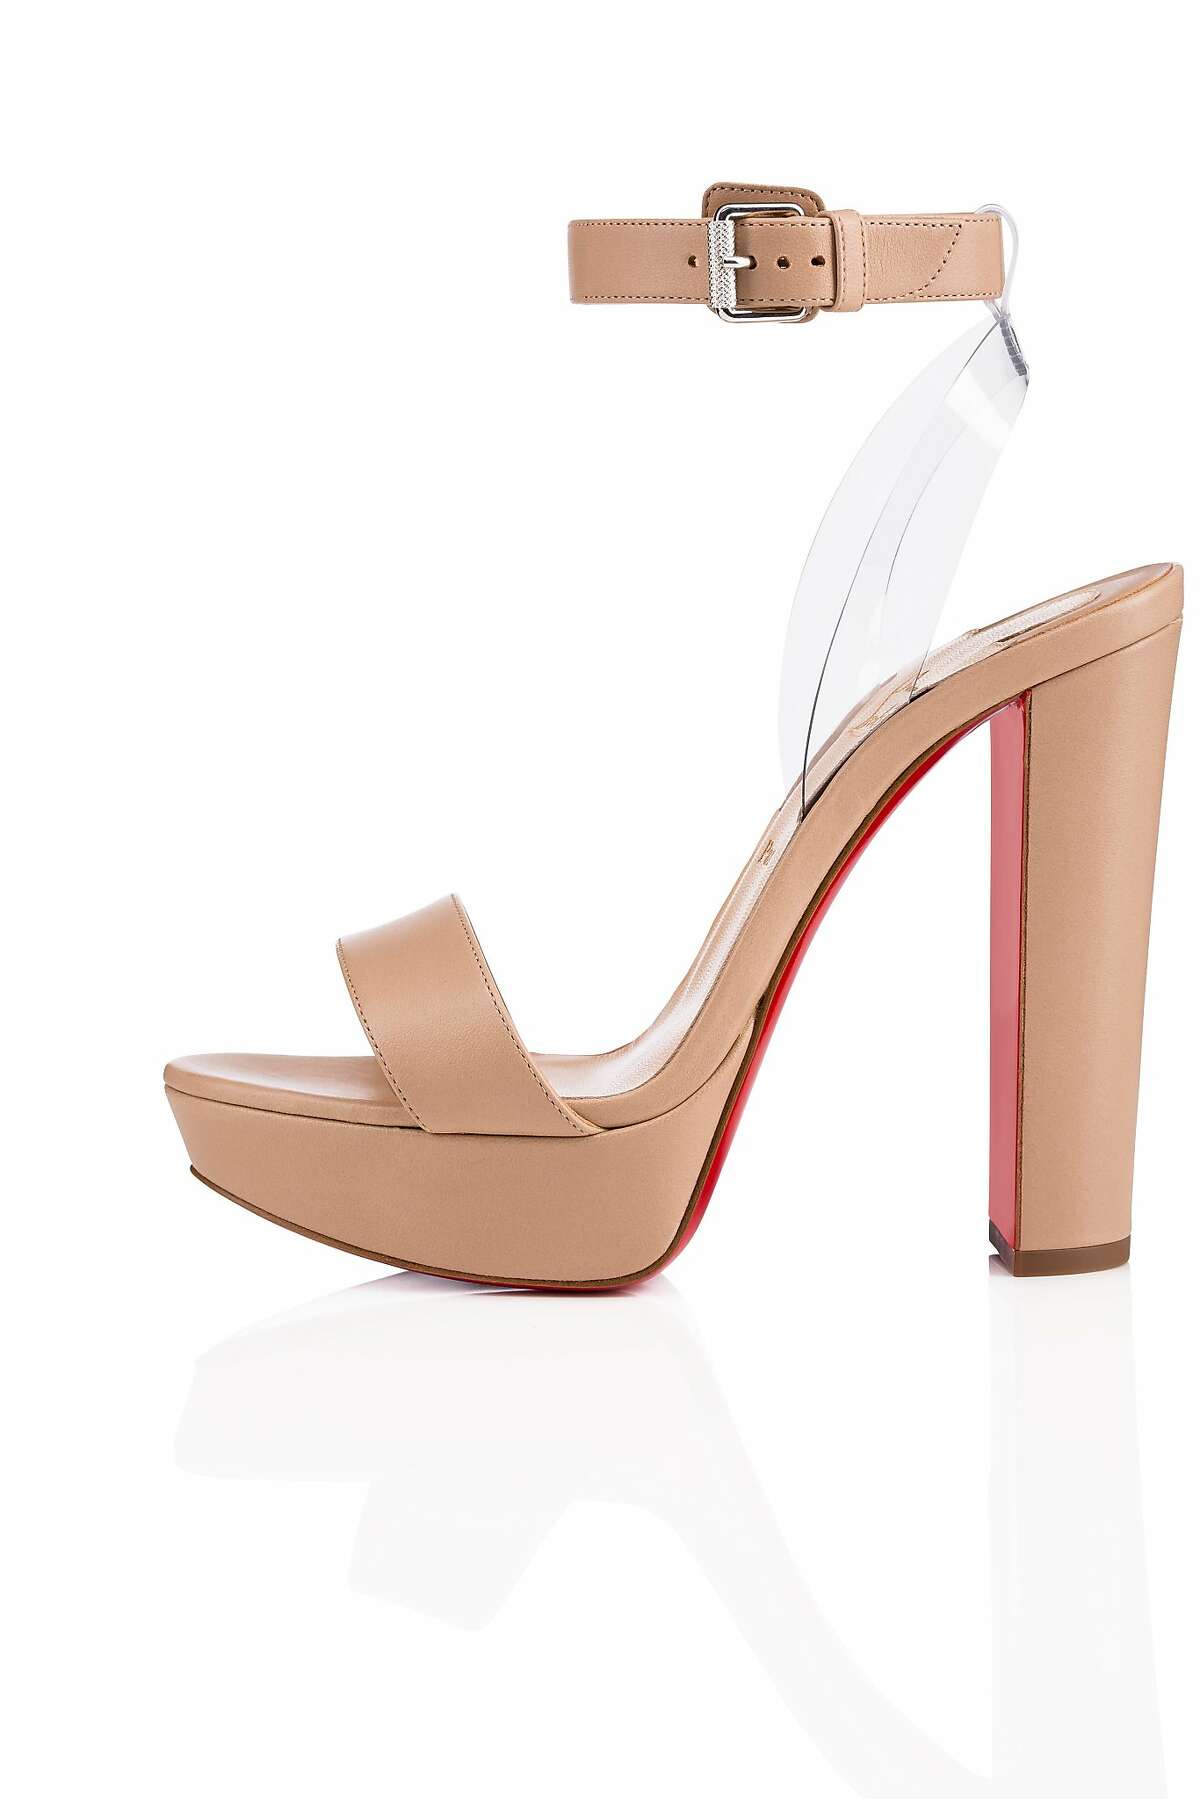 Christian Louboutin's latest "Nudes" collection features a platform, block-heeled sandal, called Cherrysandal, at $895, and a stiletto sandal with ribbons, Christeriva, at $875, in seven colors to suit a variety of skin tones. At Christian Louboutin boutiques and www.christianlouboutin.com. Shown here is the Cherrysandal.